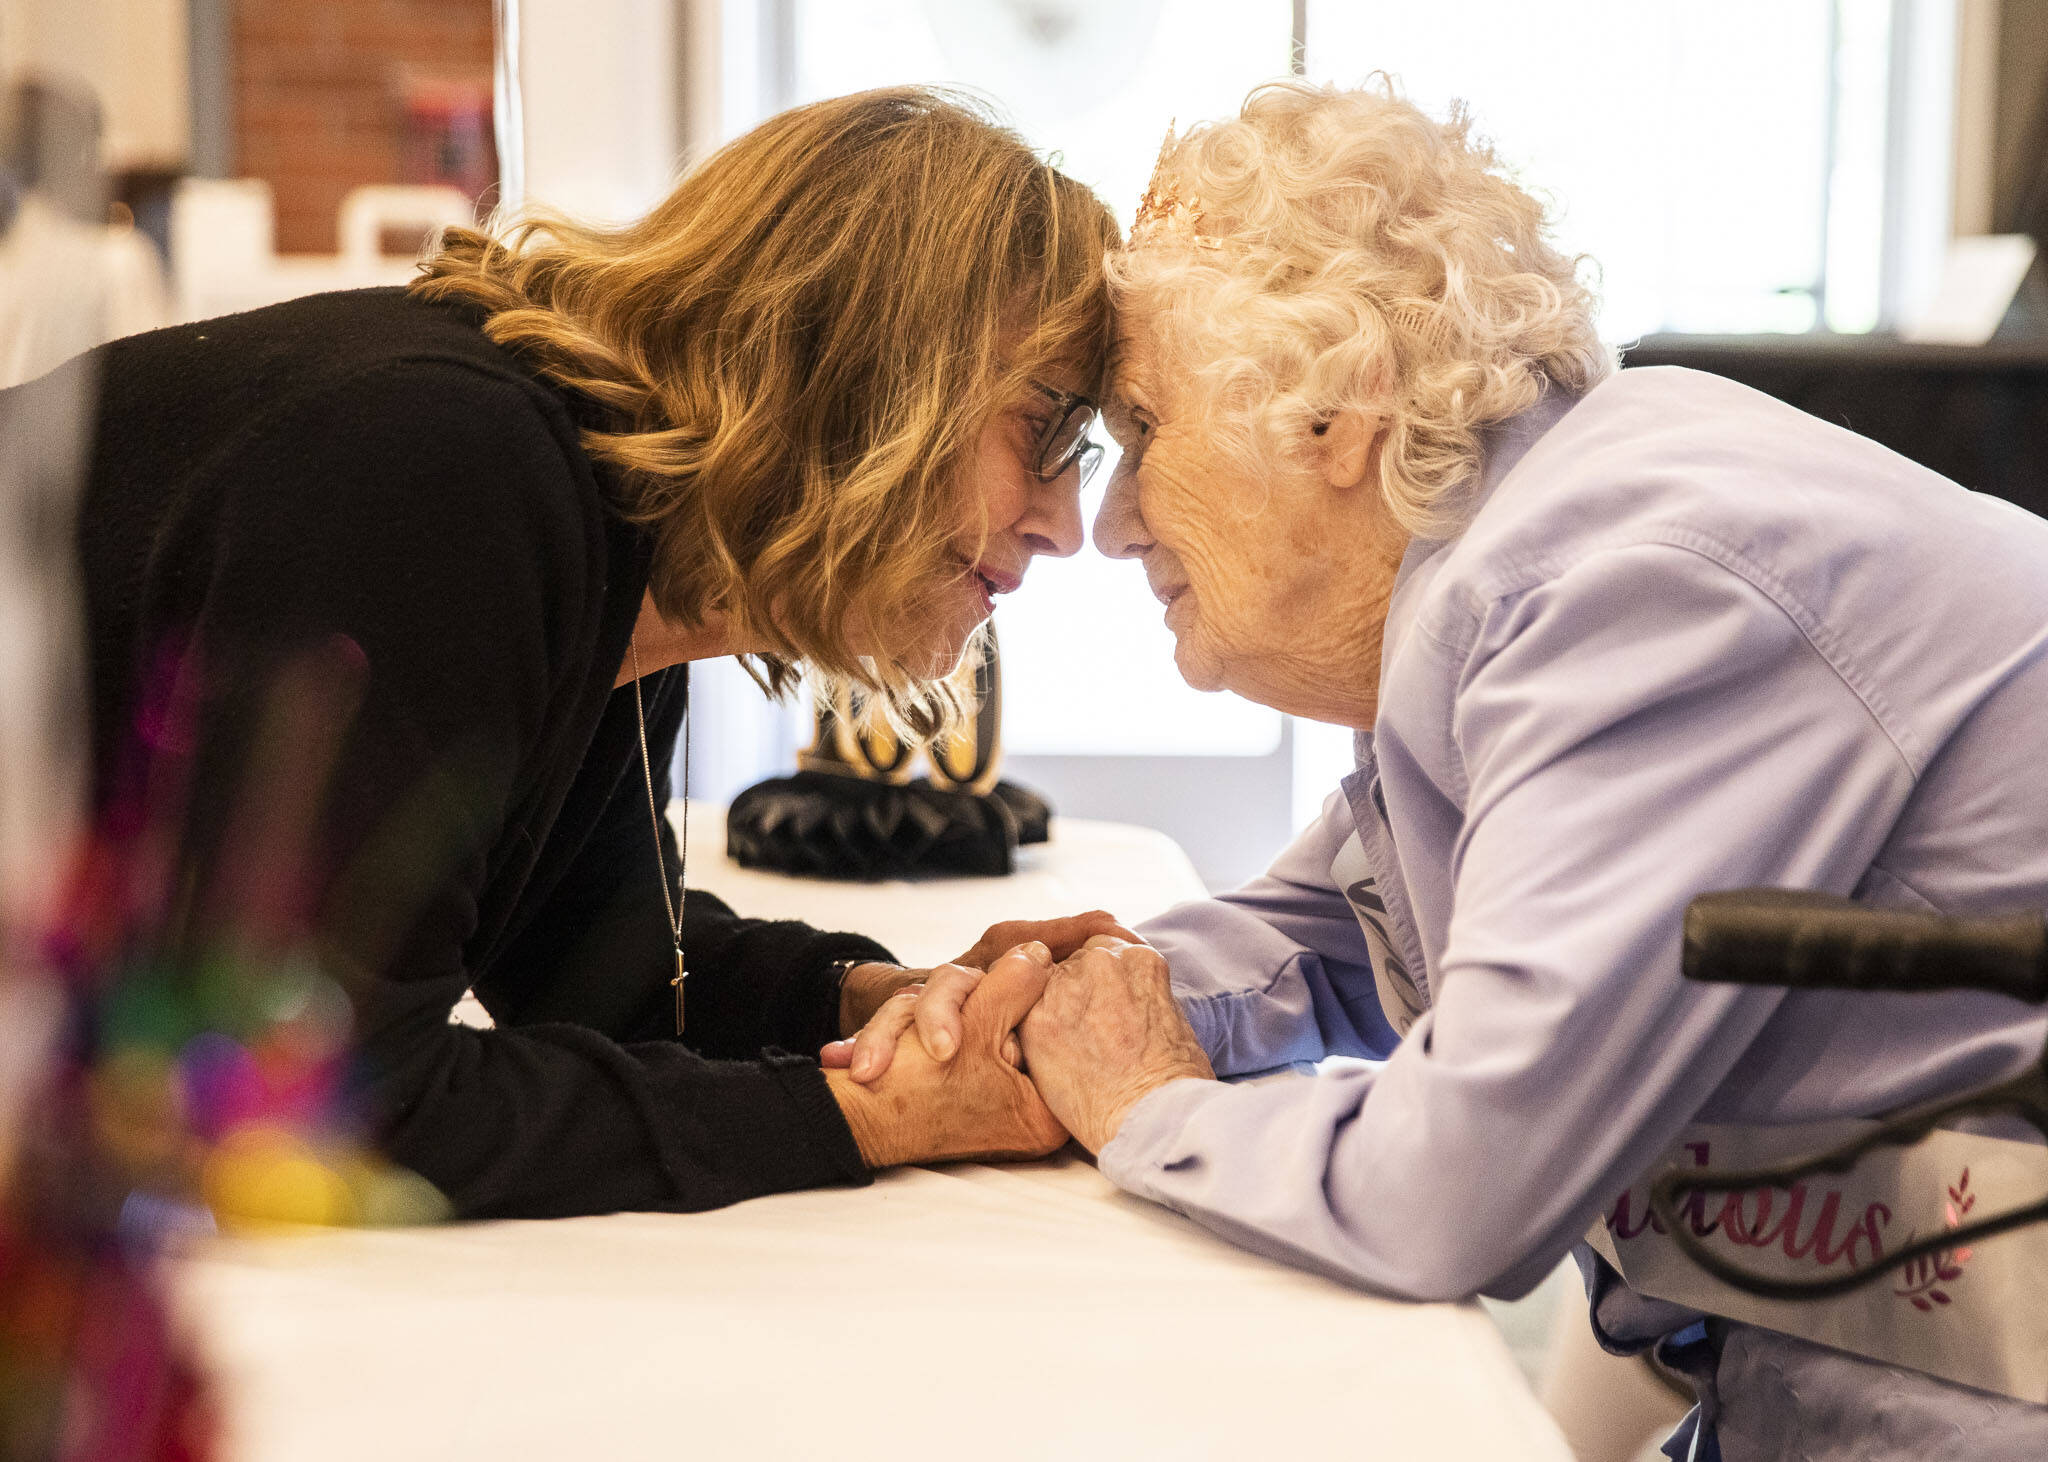 Beverly LaBruyere has a moment with Ferne Ullestad at the party. (Olivia Vanni / The Herald)